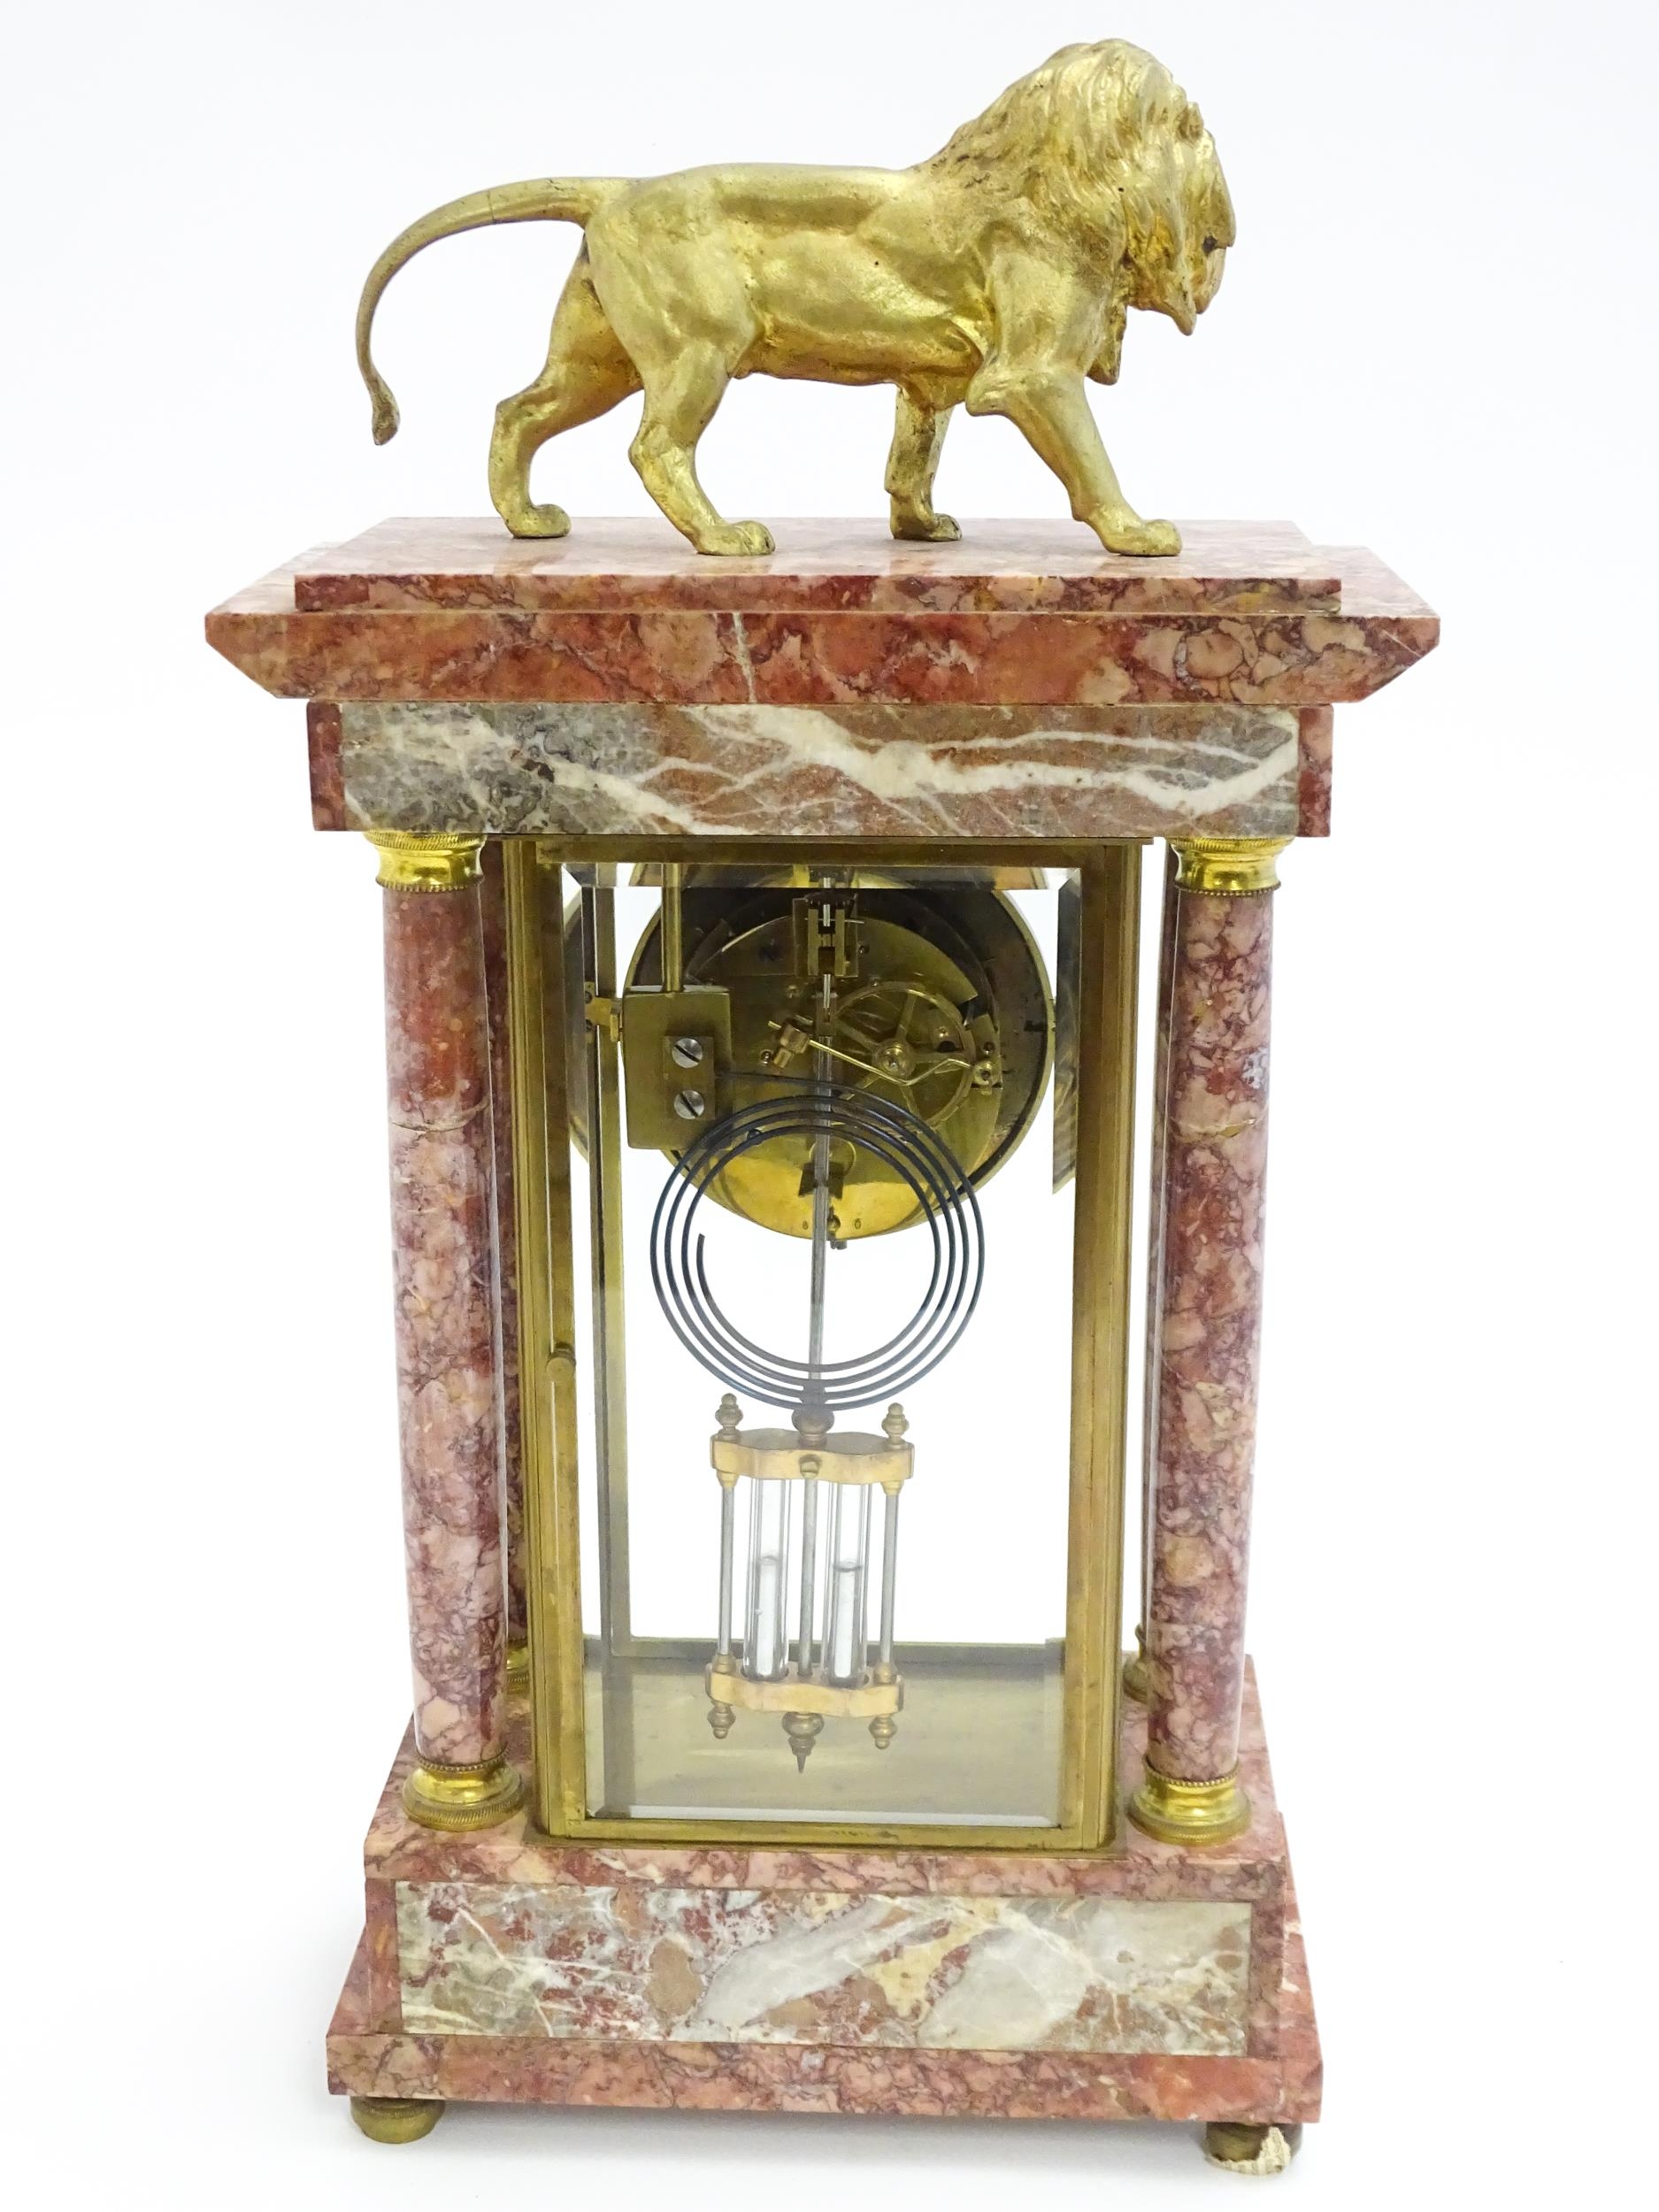 A 19thC French Three-Piece Clock Garniture, by Marti, having a white dial with floral garland swags, - Image 13 of 19